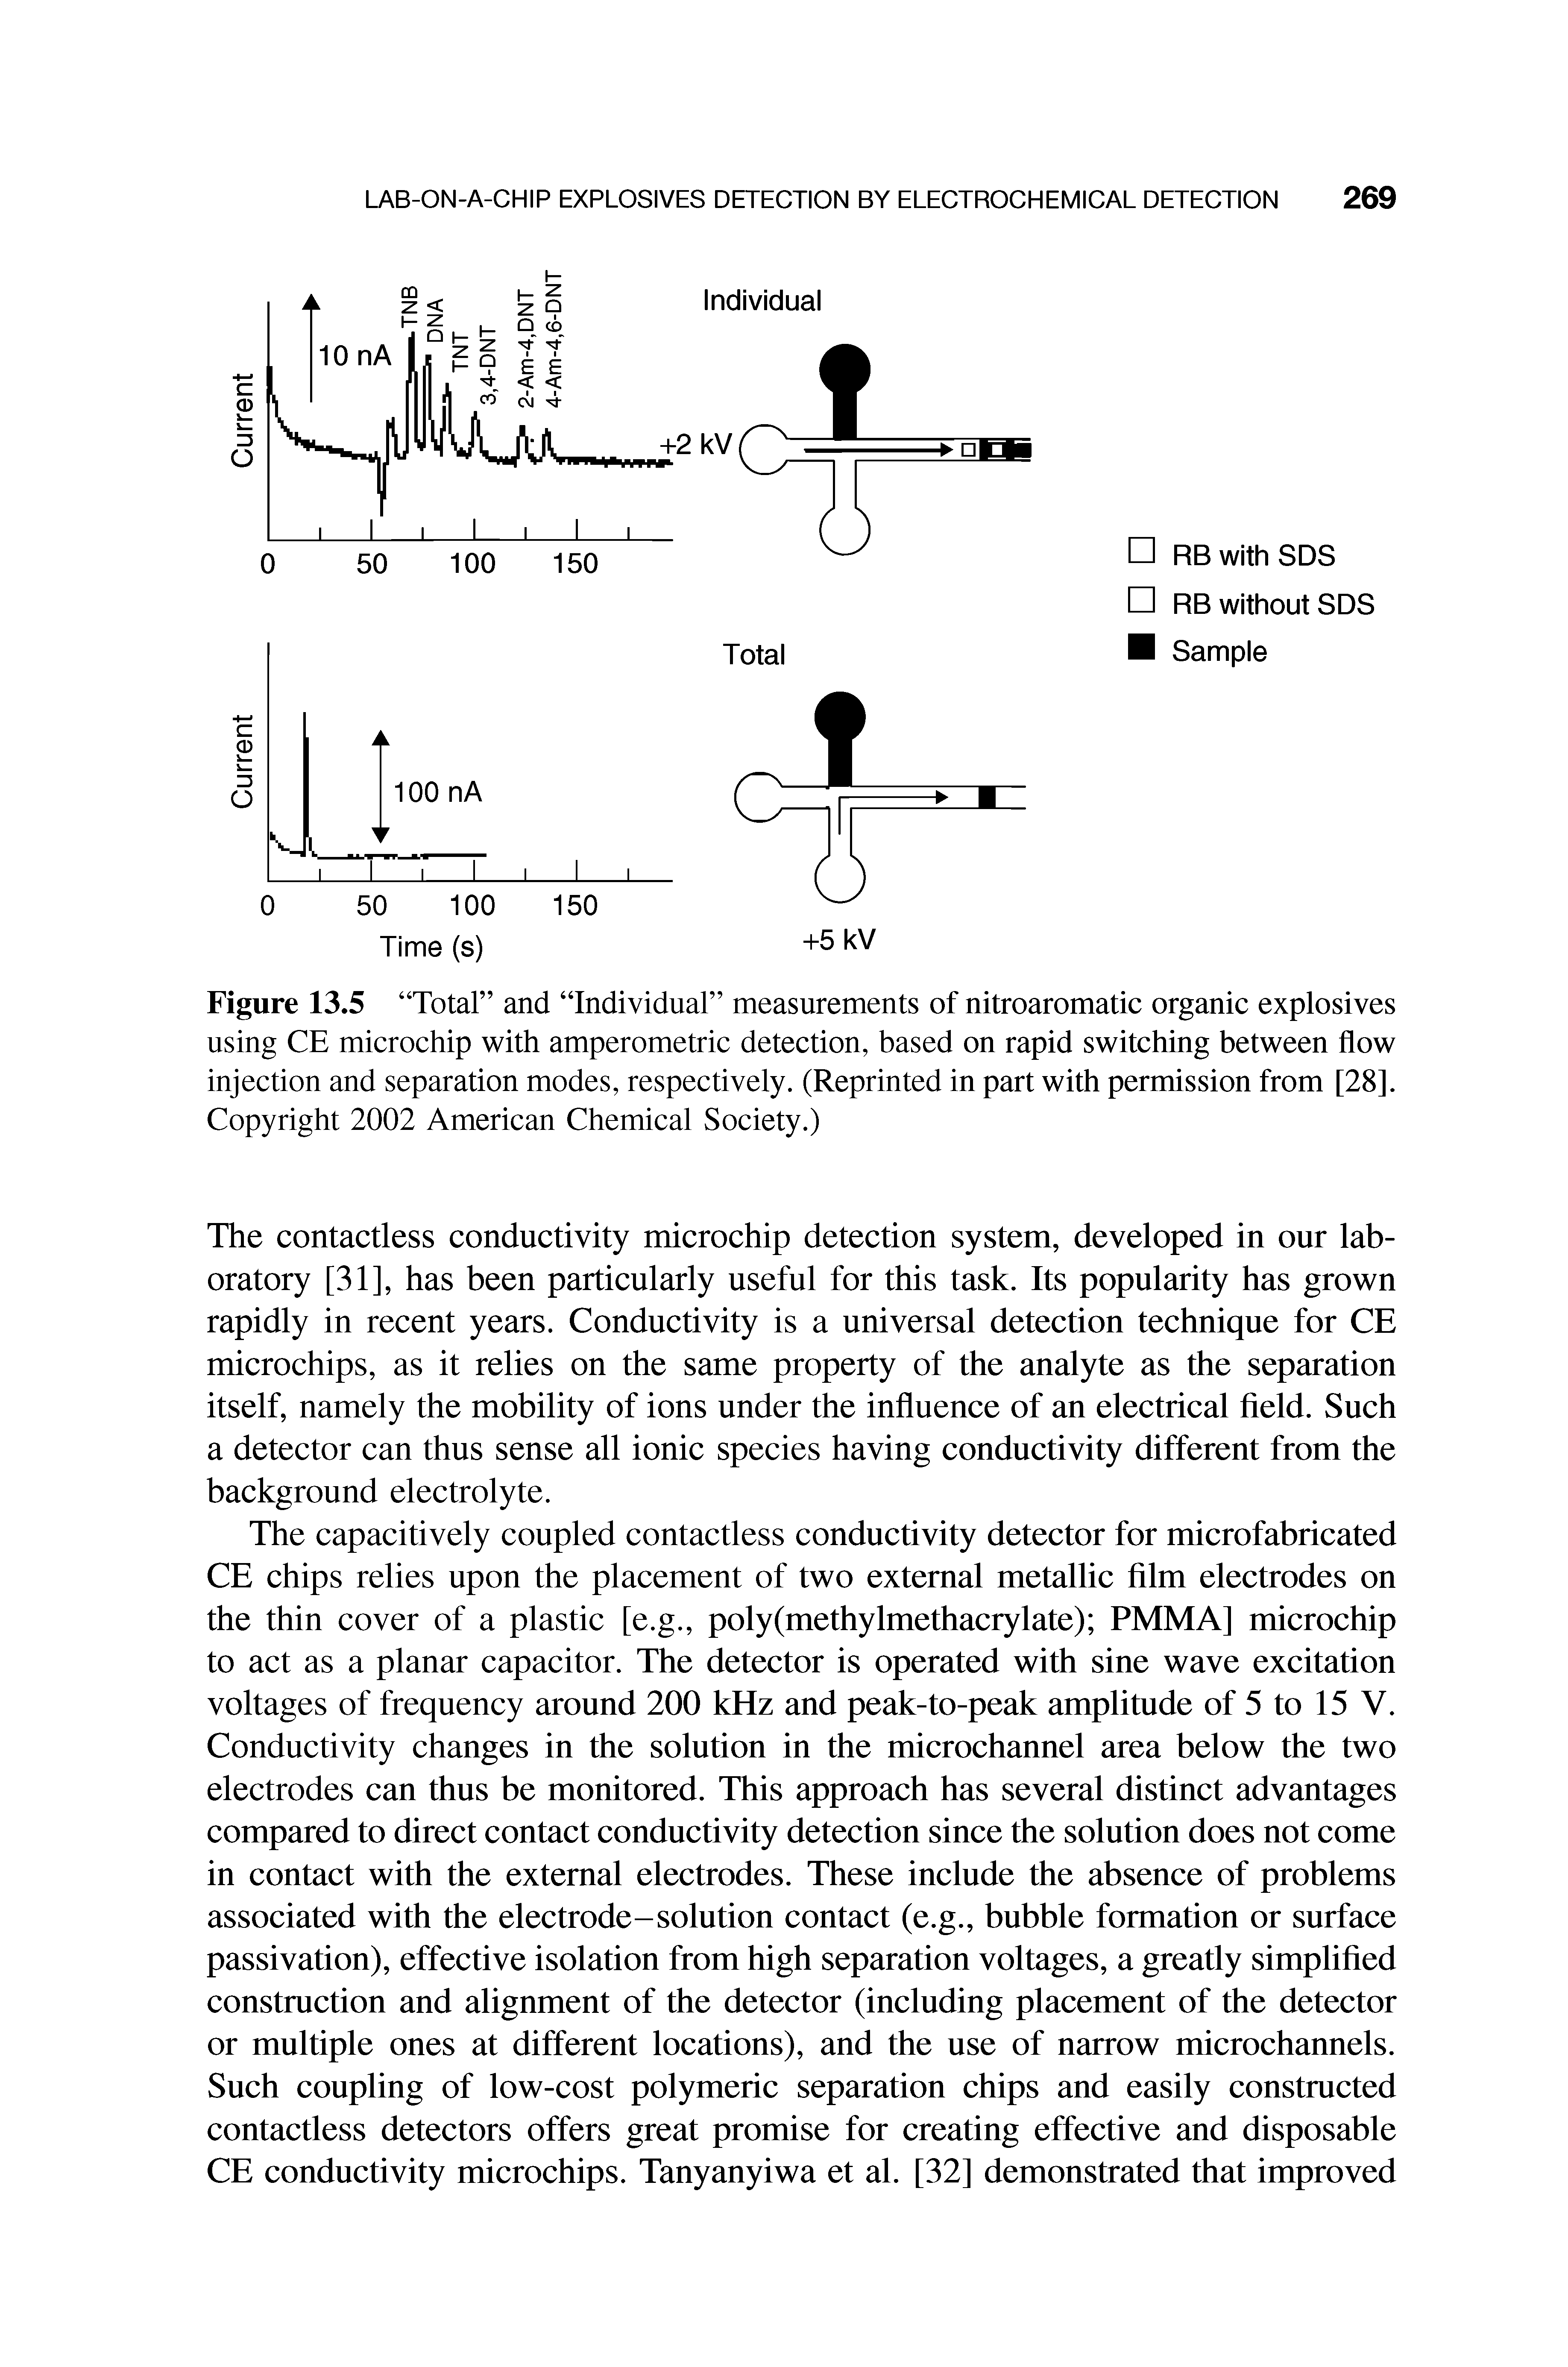 Figure 13.5 Total and Individual measurements of nitroaromatic organic explosives using CE microchip with amperometric detection, based on rapid switching between flow injection and separation modes, respectively. (Reprinted in part with permission from [28]. Copyright 2002 American Chemical Society.)...